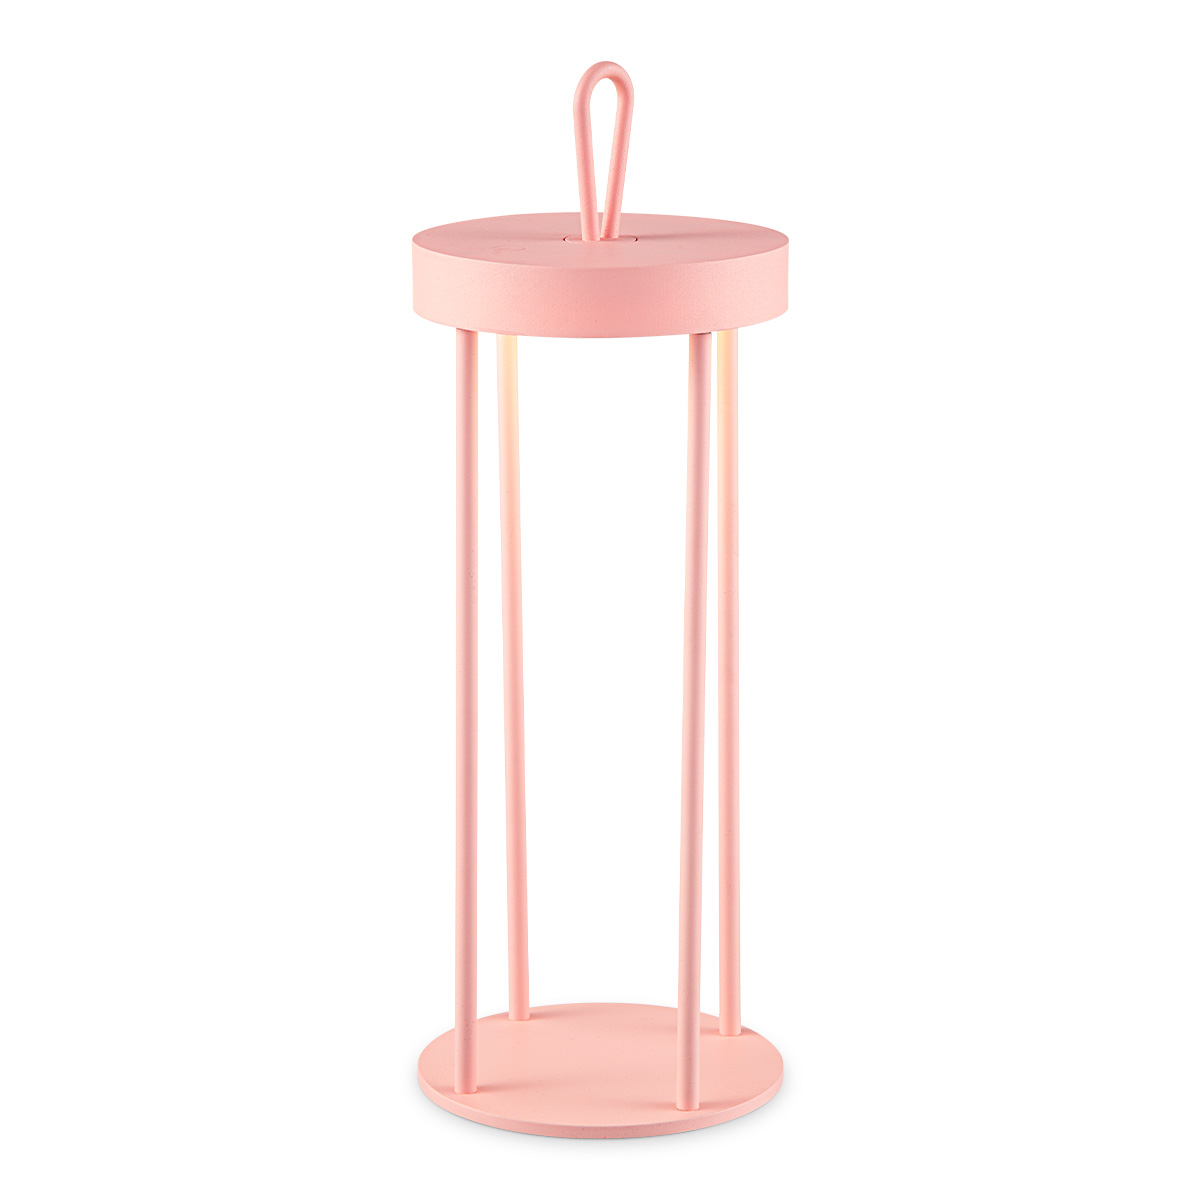 Tangla lighting - TLT7654-01PK - LED table lamp - outdoor lighting - rechargeable plastic and metal - touch dimmer - pink - pavilion